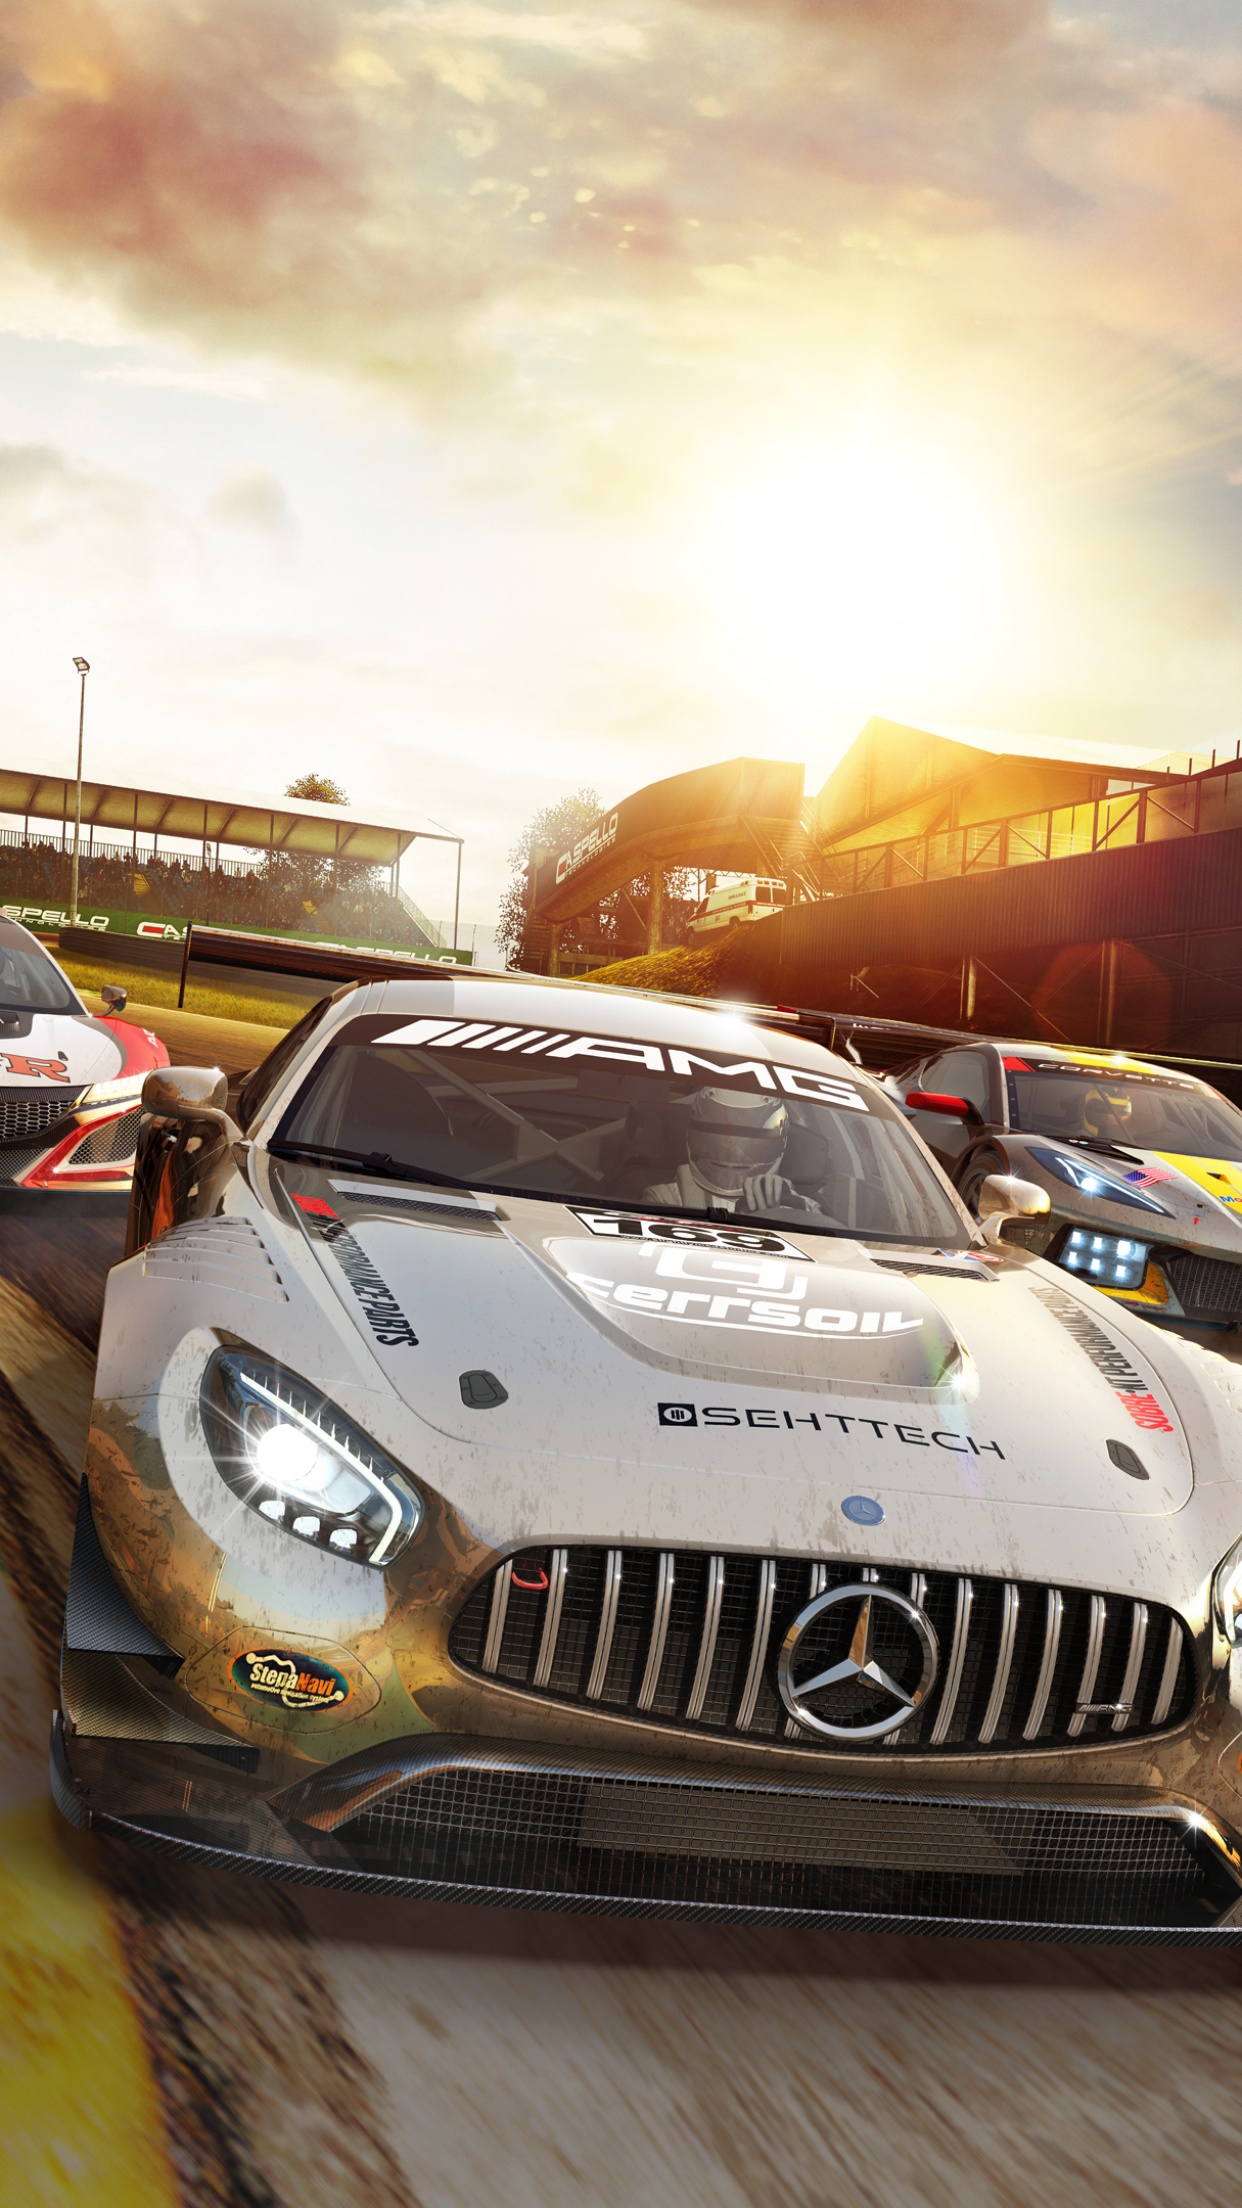 Project CARS 3 Wallpaper 4K, 2020 Games, PlayStation 4, Xbox One, PC